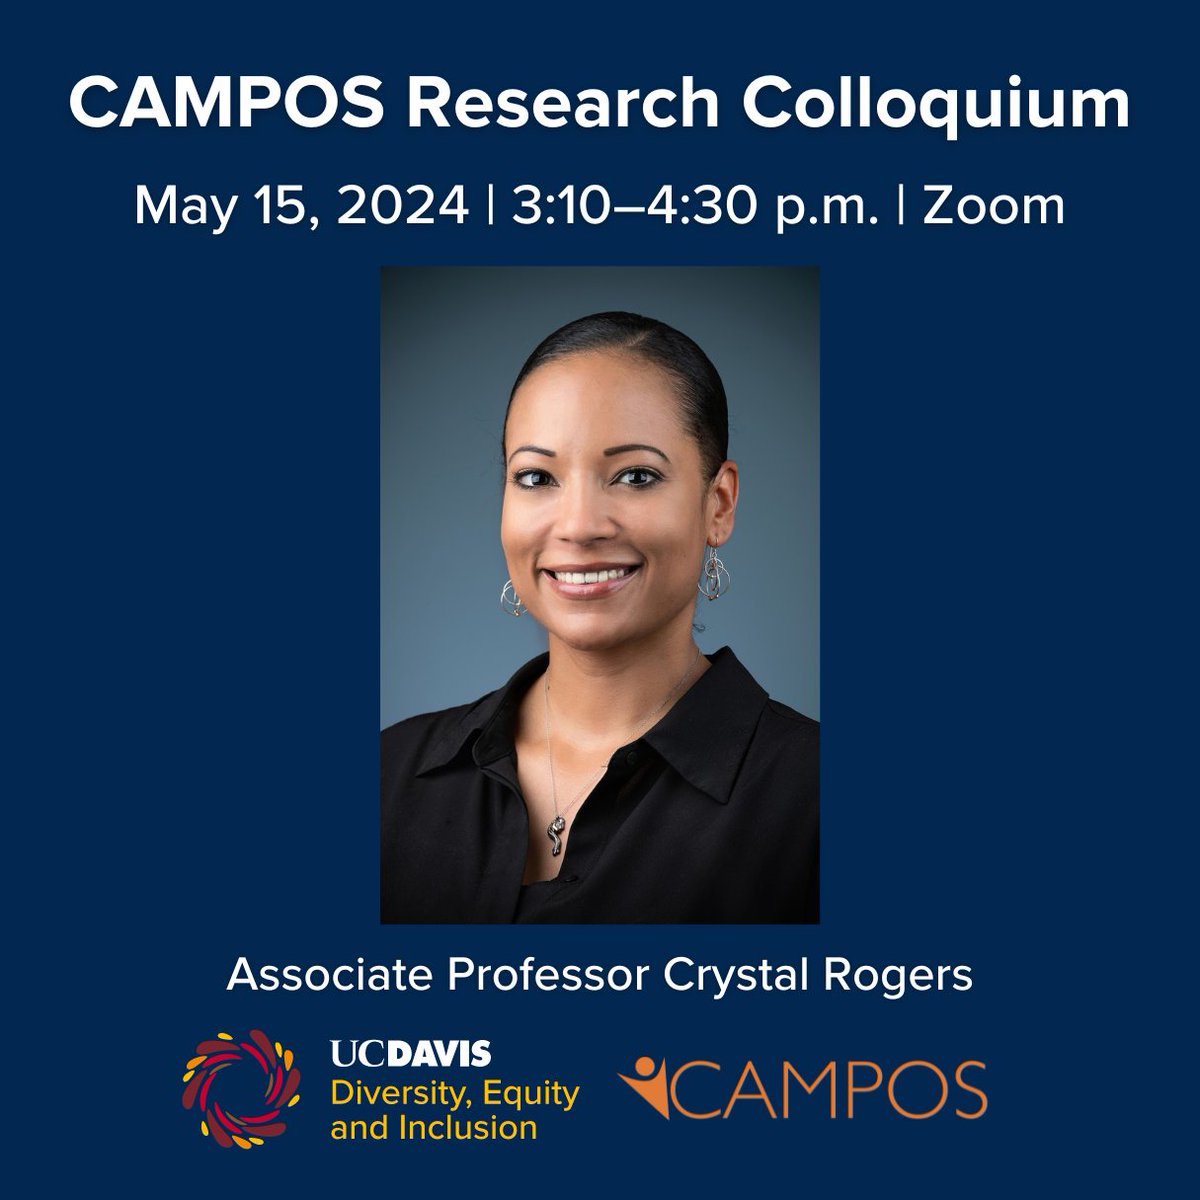 Join the #CAMPOSResearchColloquium tomorrow! Crystal Rogers, a CAMPOS scholar and an associate professor in anatomy, physiology & cell biology at @UCDavisVetMed, will be presenting. Learn more: diversity.ucdavis.edu/events/campos-…